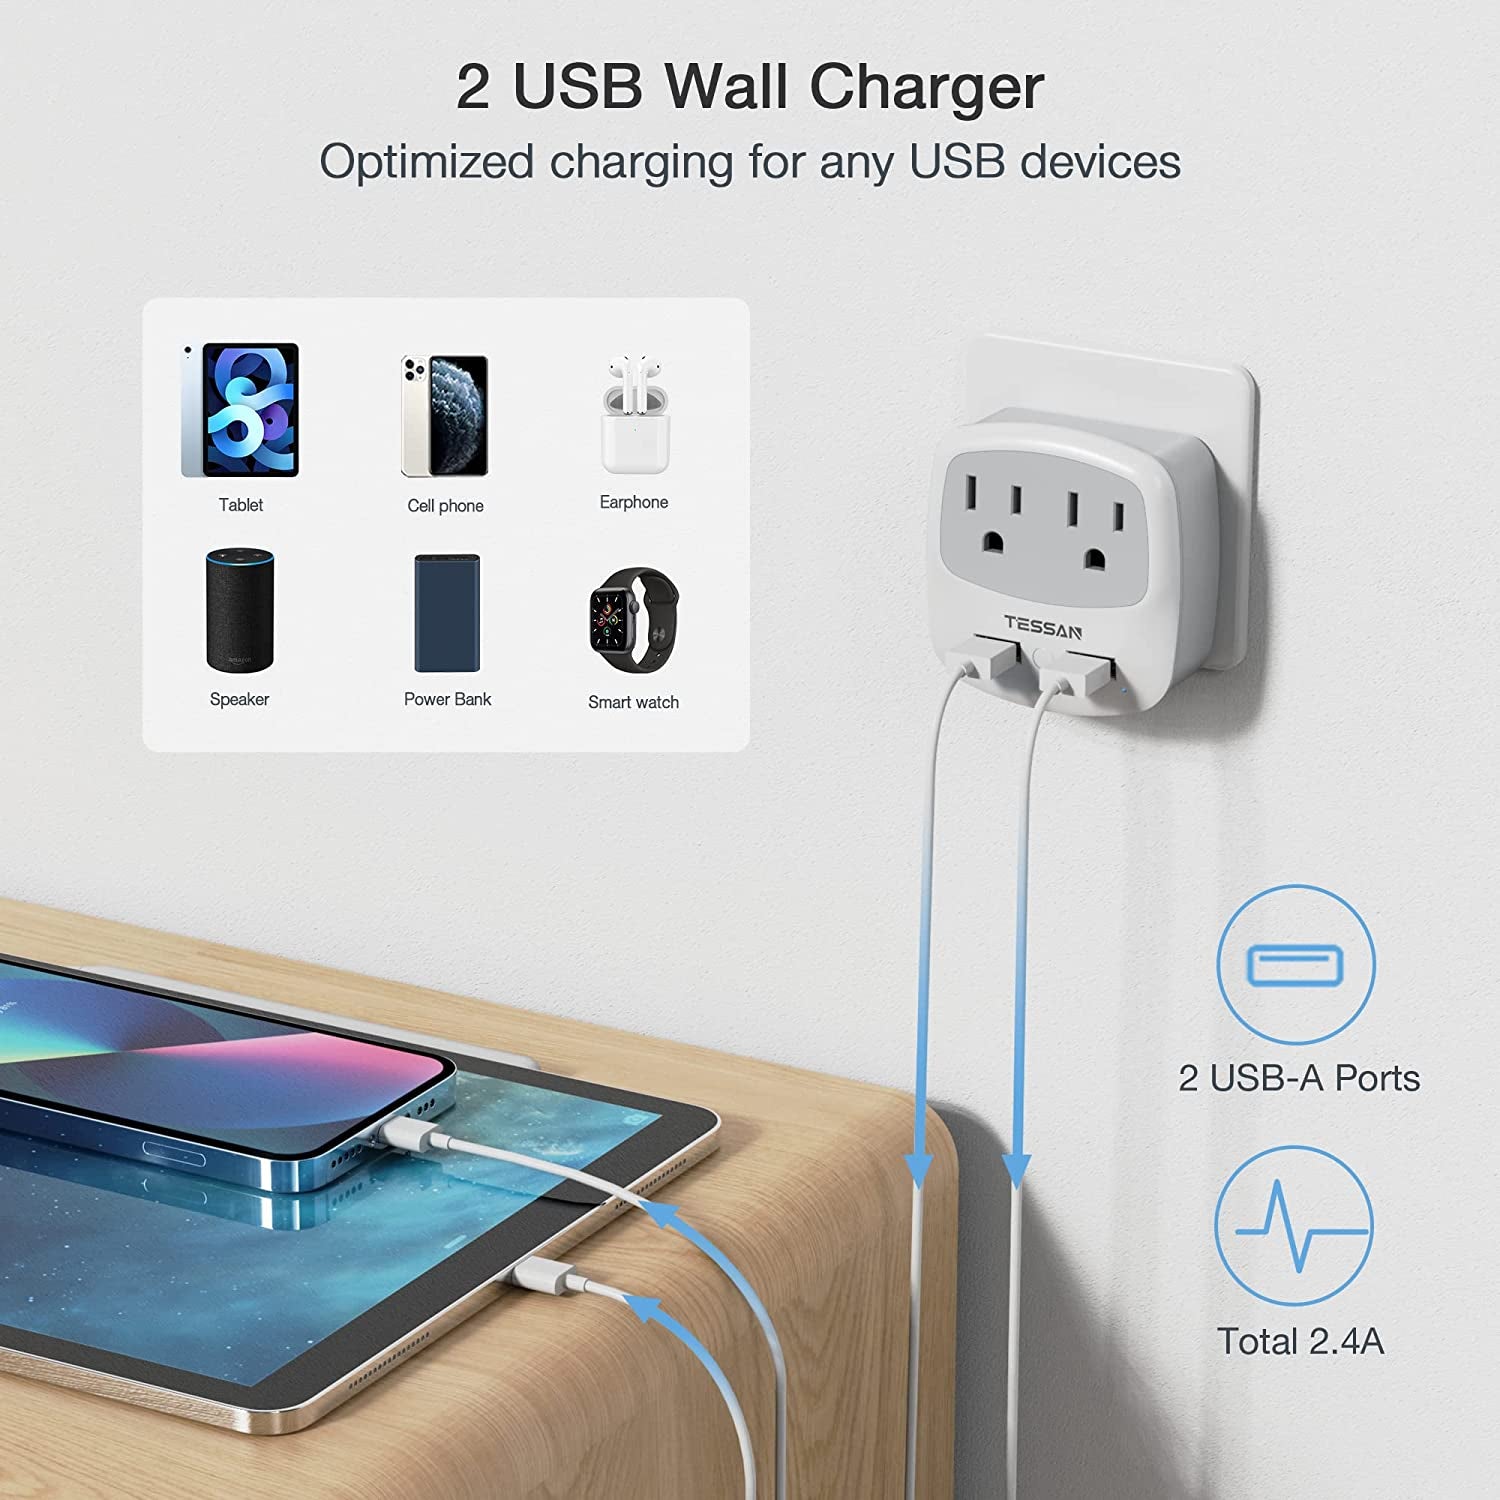 European Travel Plug Adapter with 2 USB Ports Type C Outlet US to Most of Europe